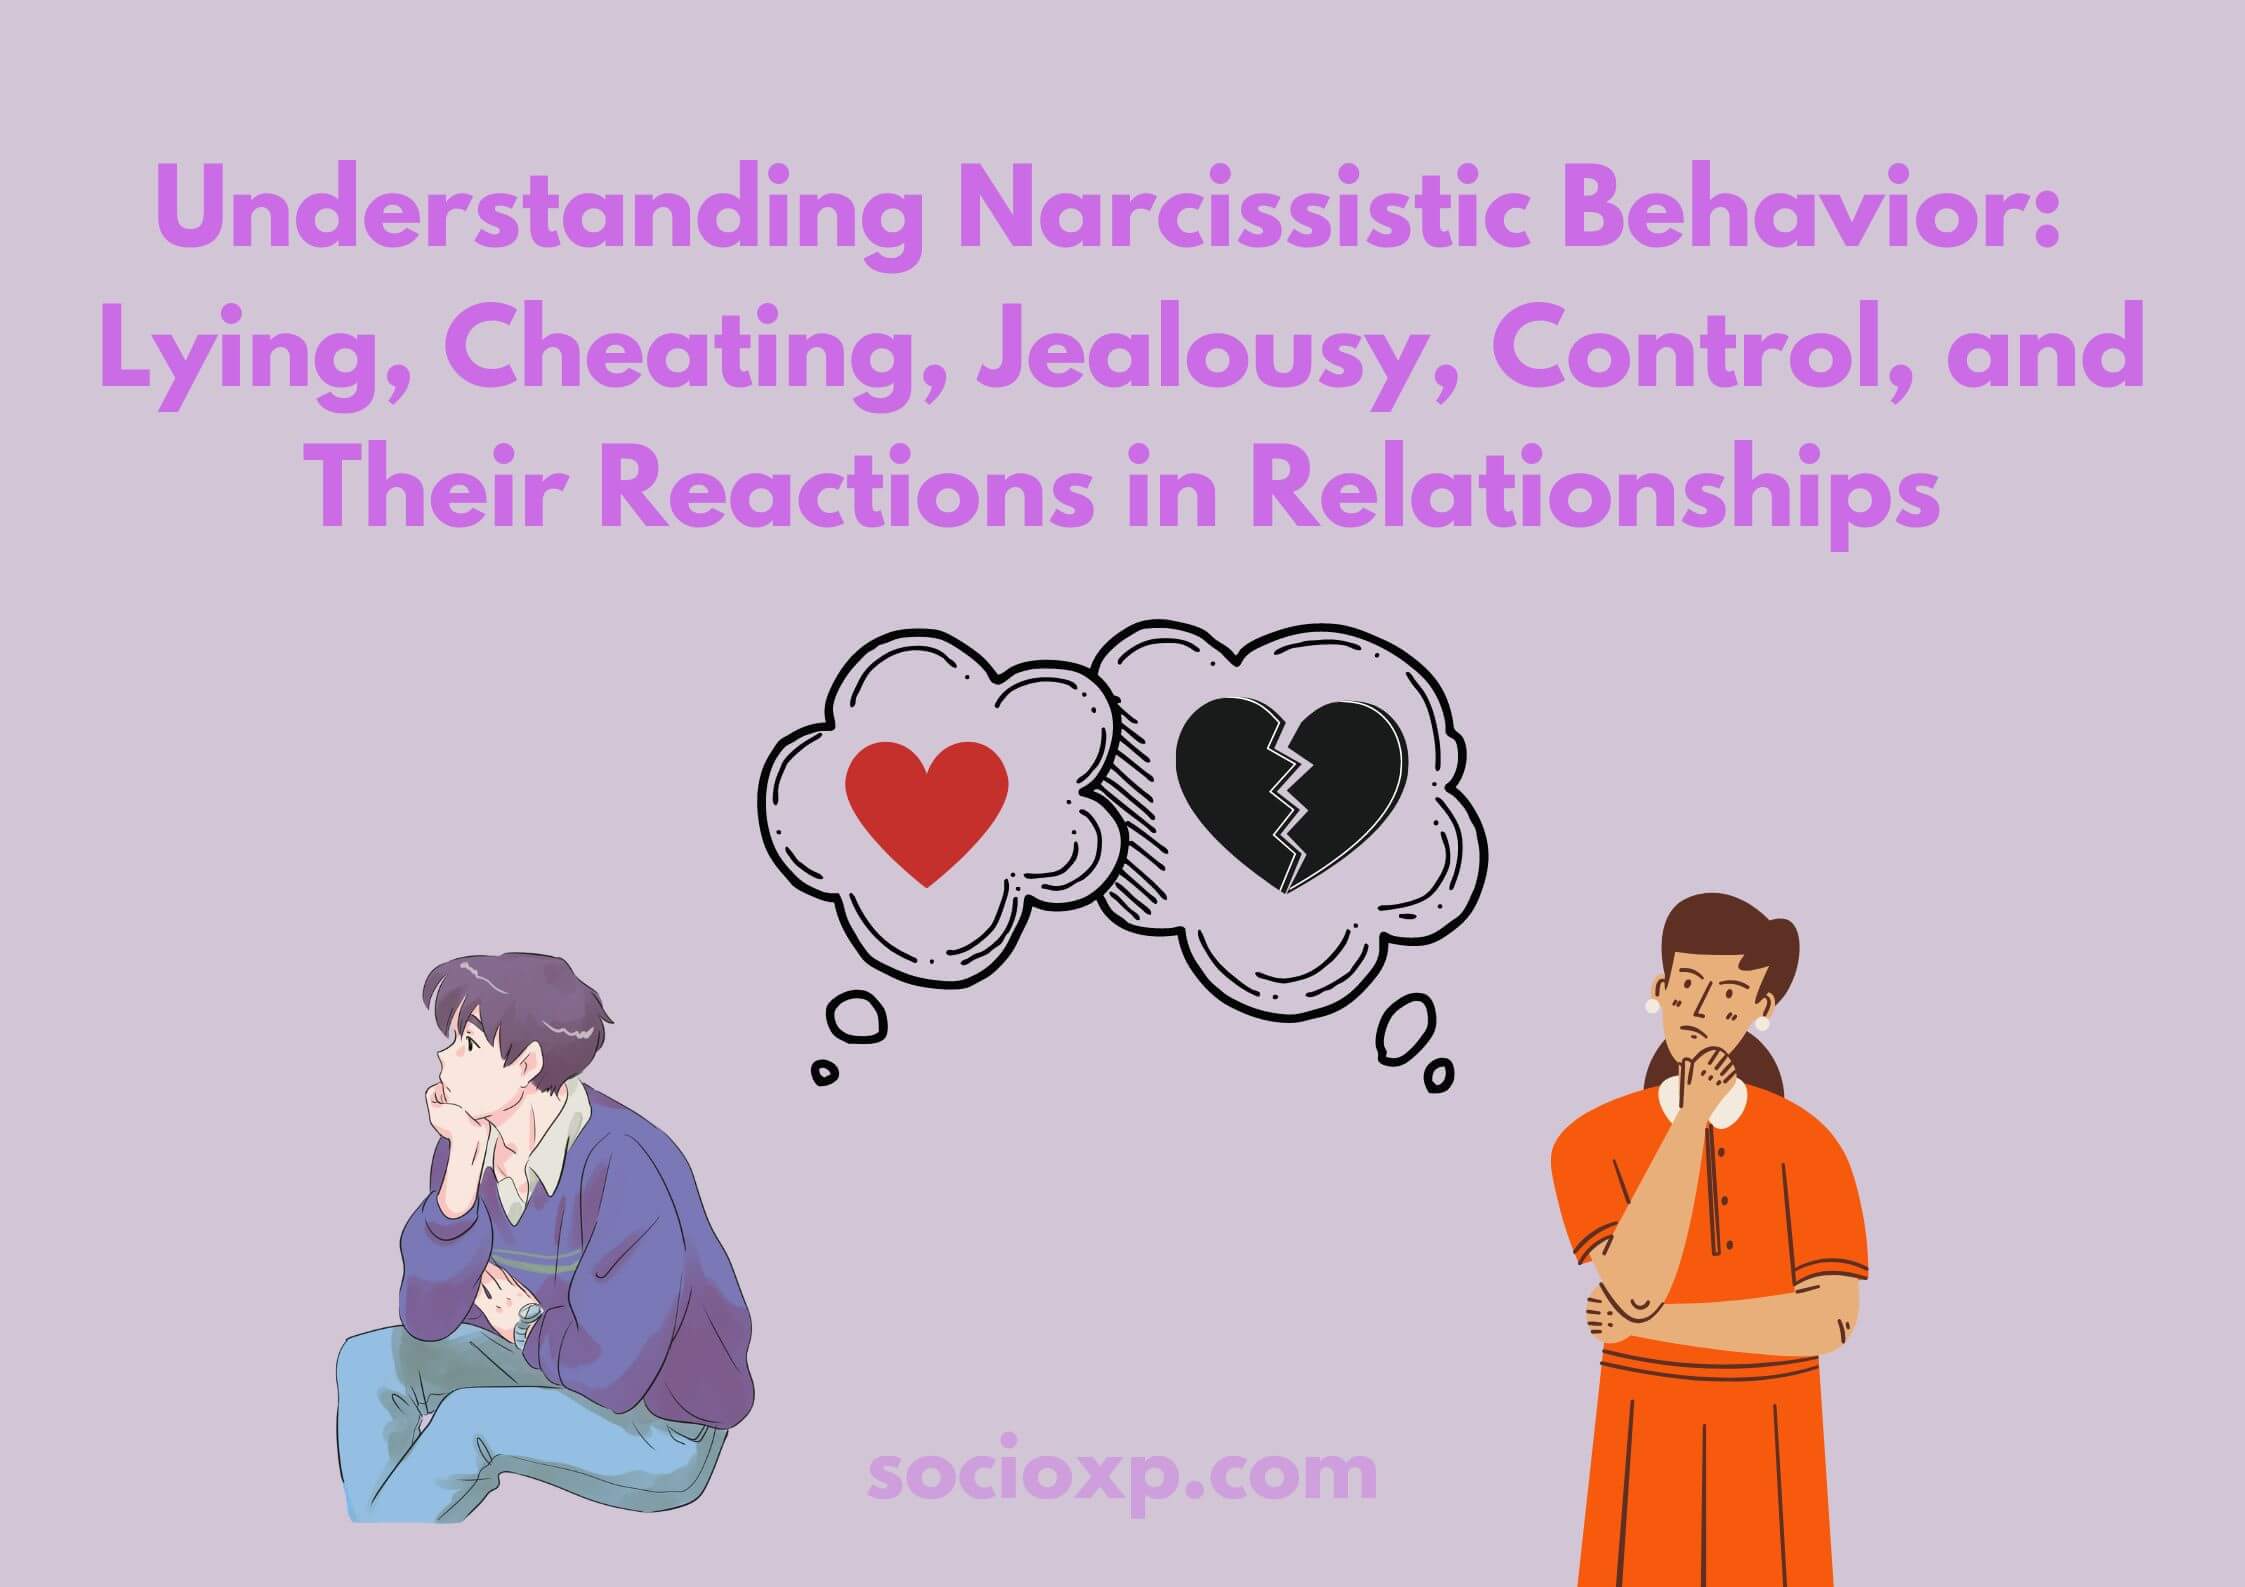 Understanding Narcissistic Behavior: Lying, Cheating, Jealousy, Control, and Their Reactions in Relationships